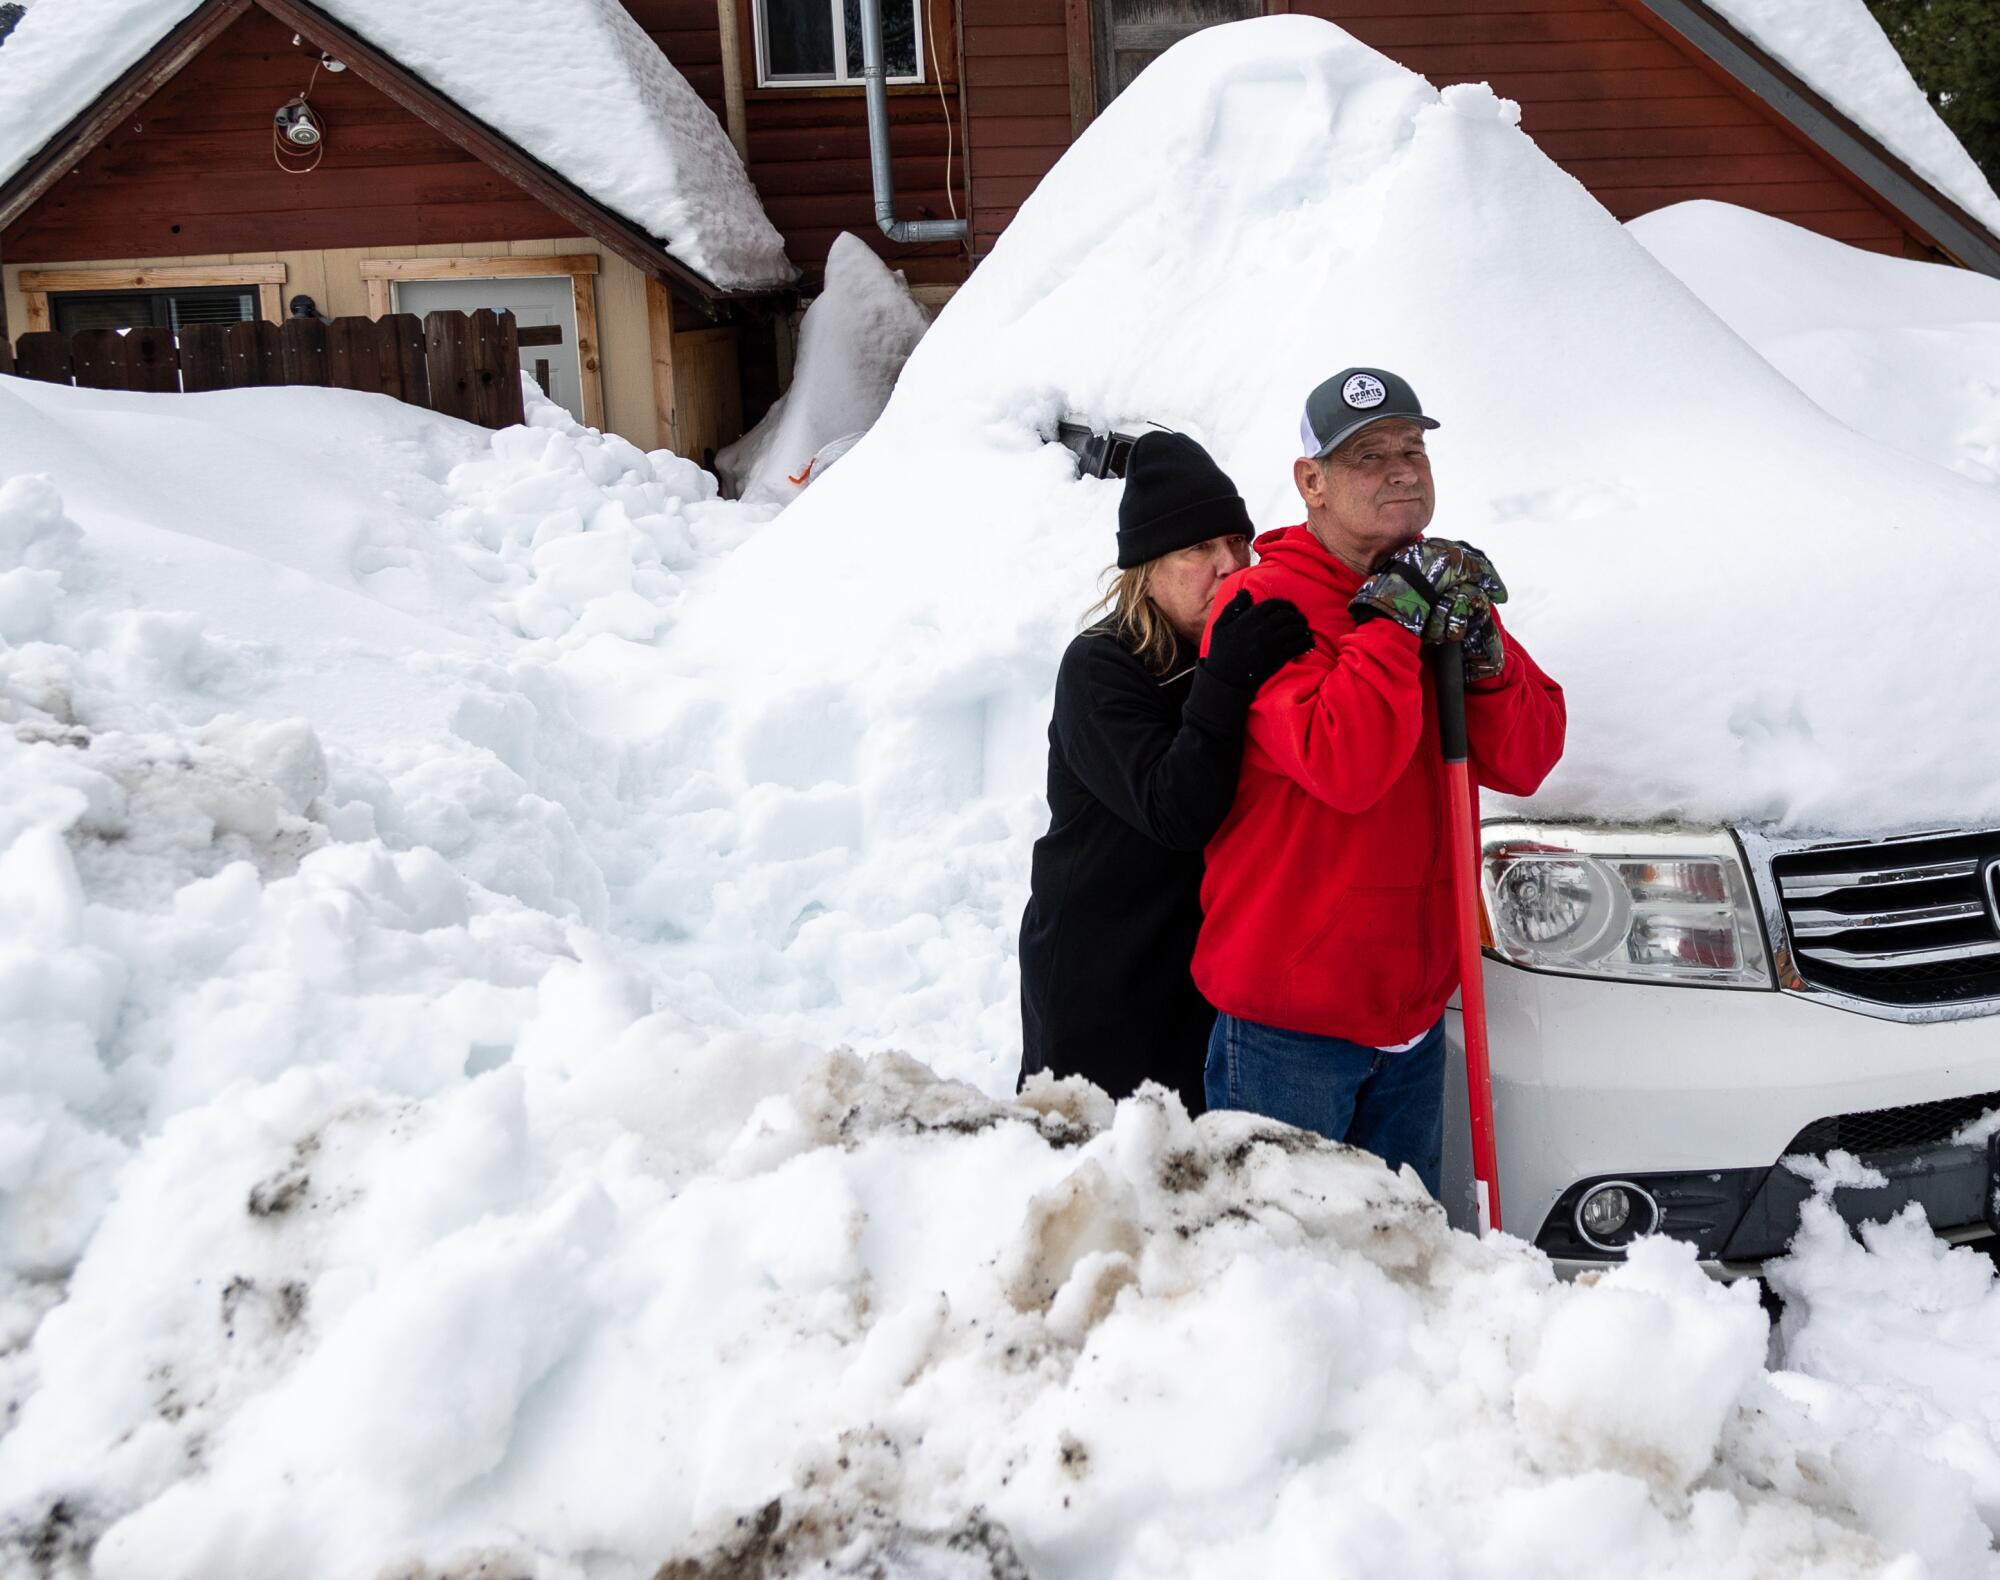 Deanna Beaudoin leans on Don Kendrick while taking a break from shoveling out their car.